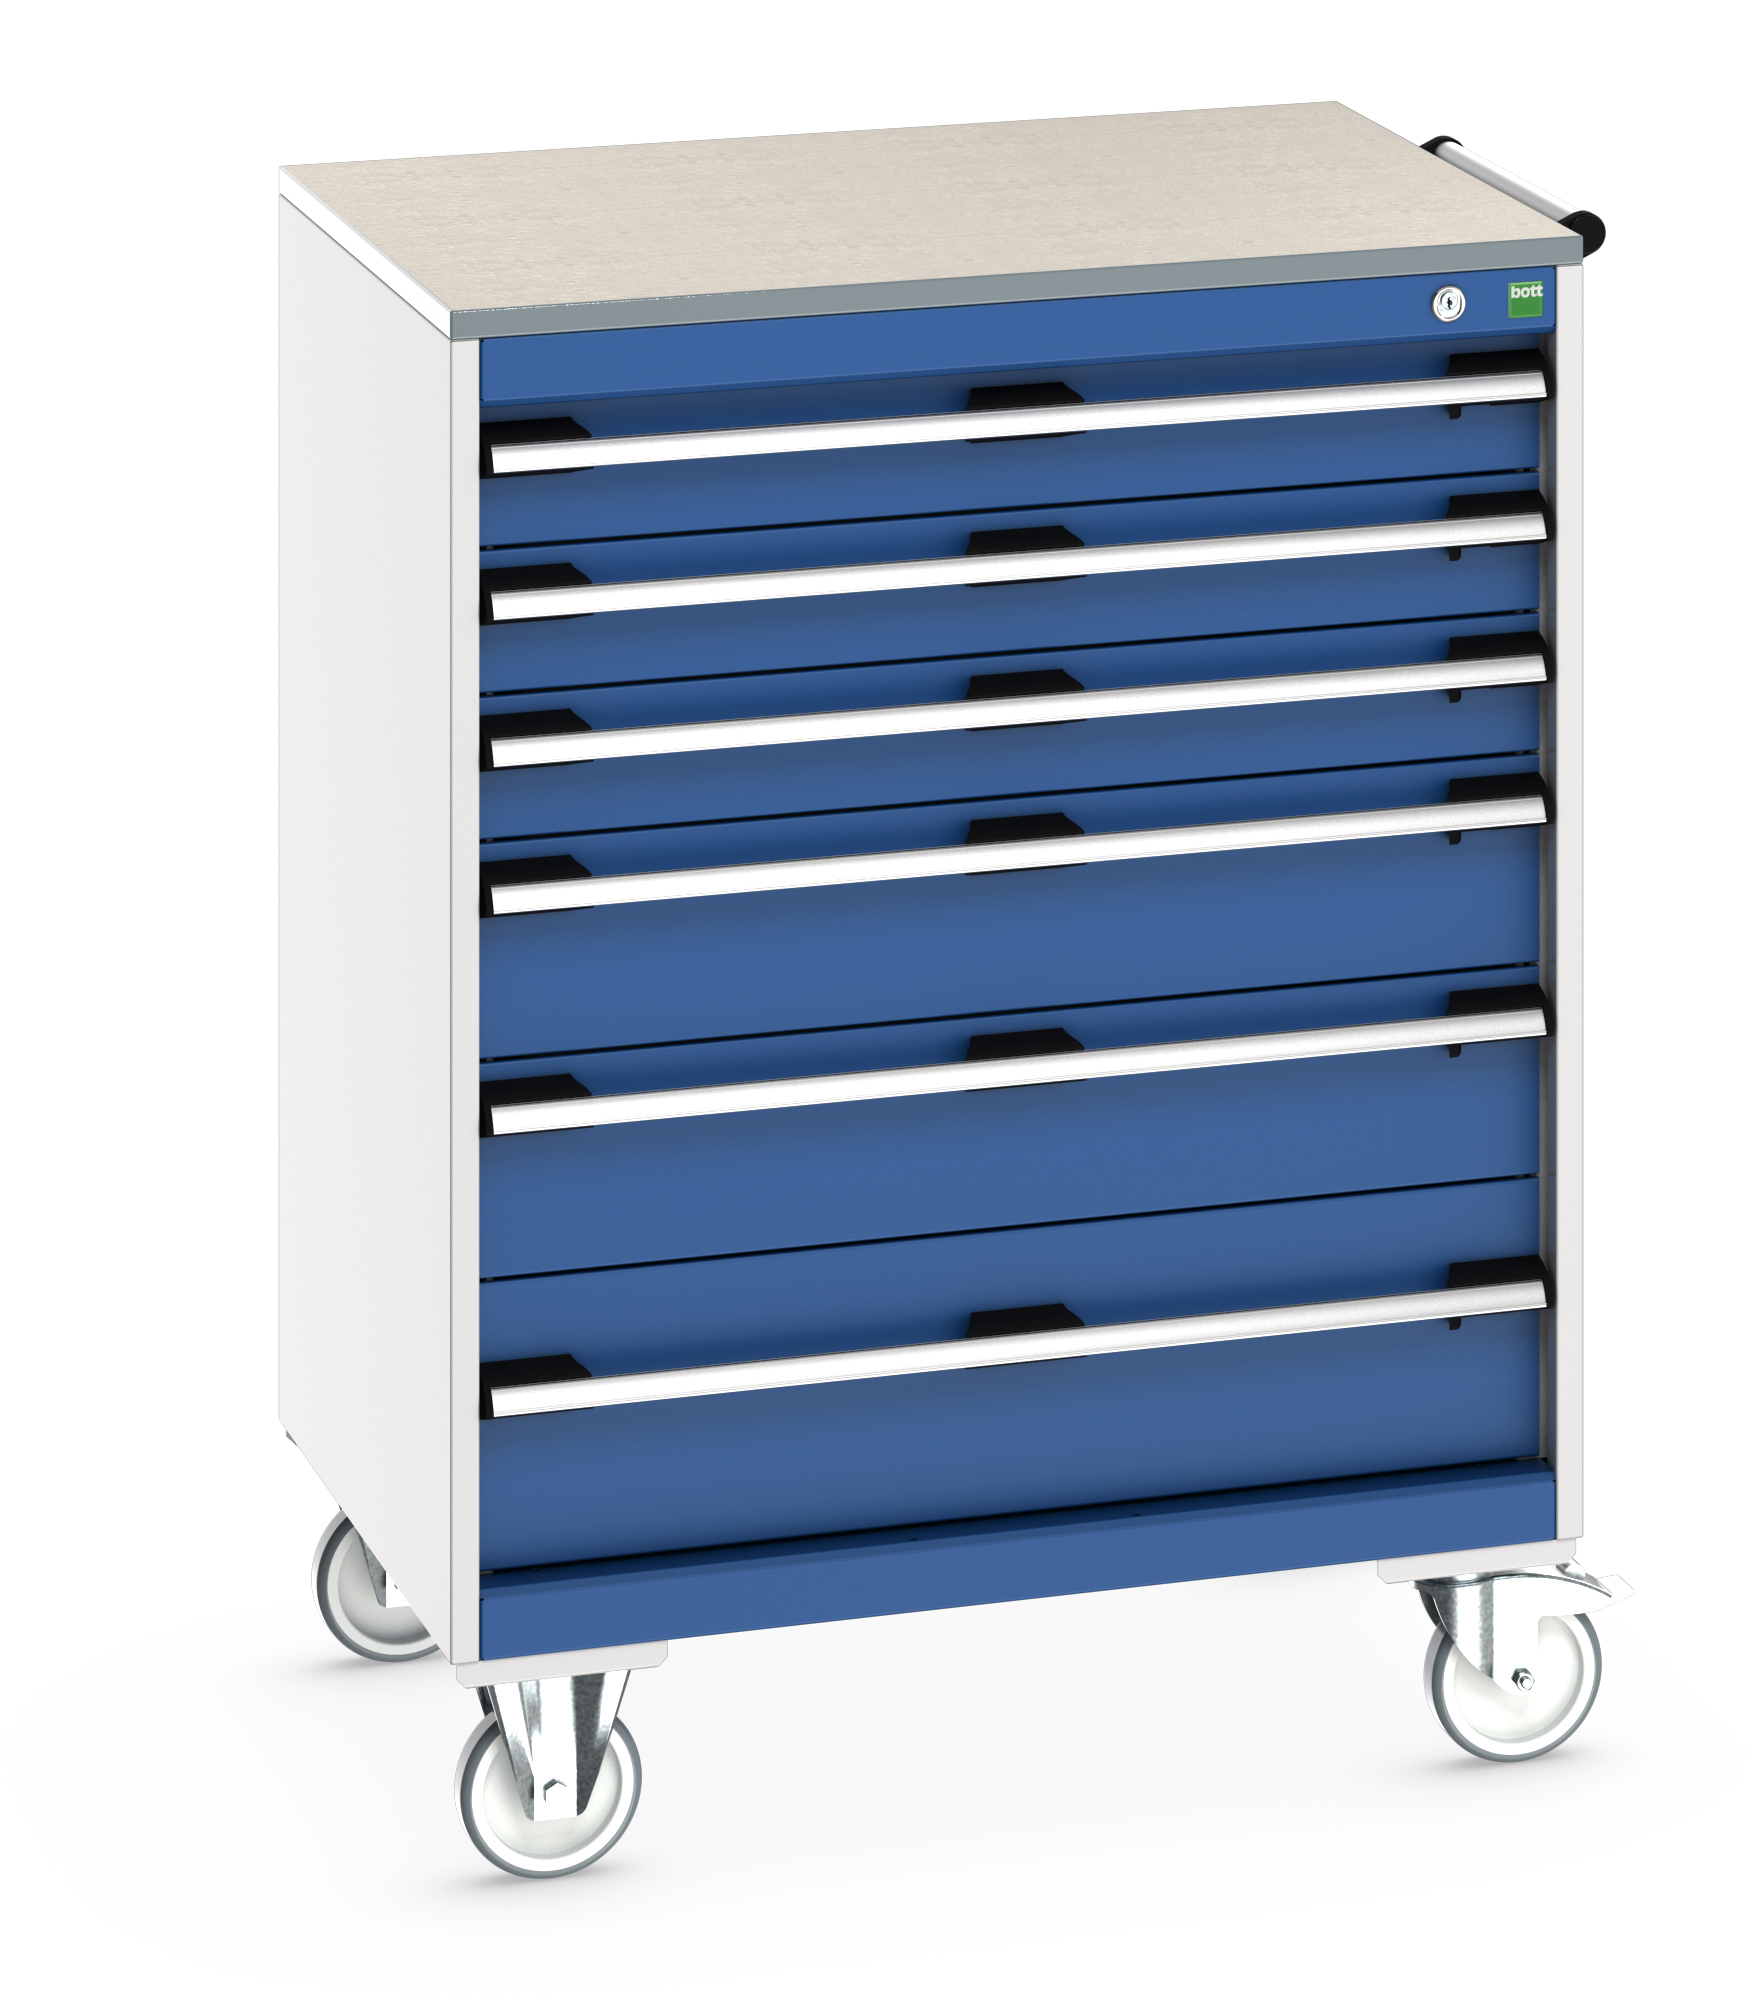 Bott Cubio Mobile Drawer Cabinet With 6 Drawers & Lino Worktop - 40402160.11V